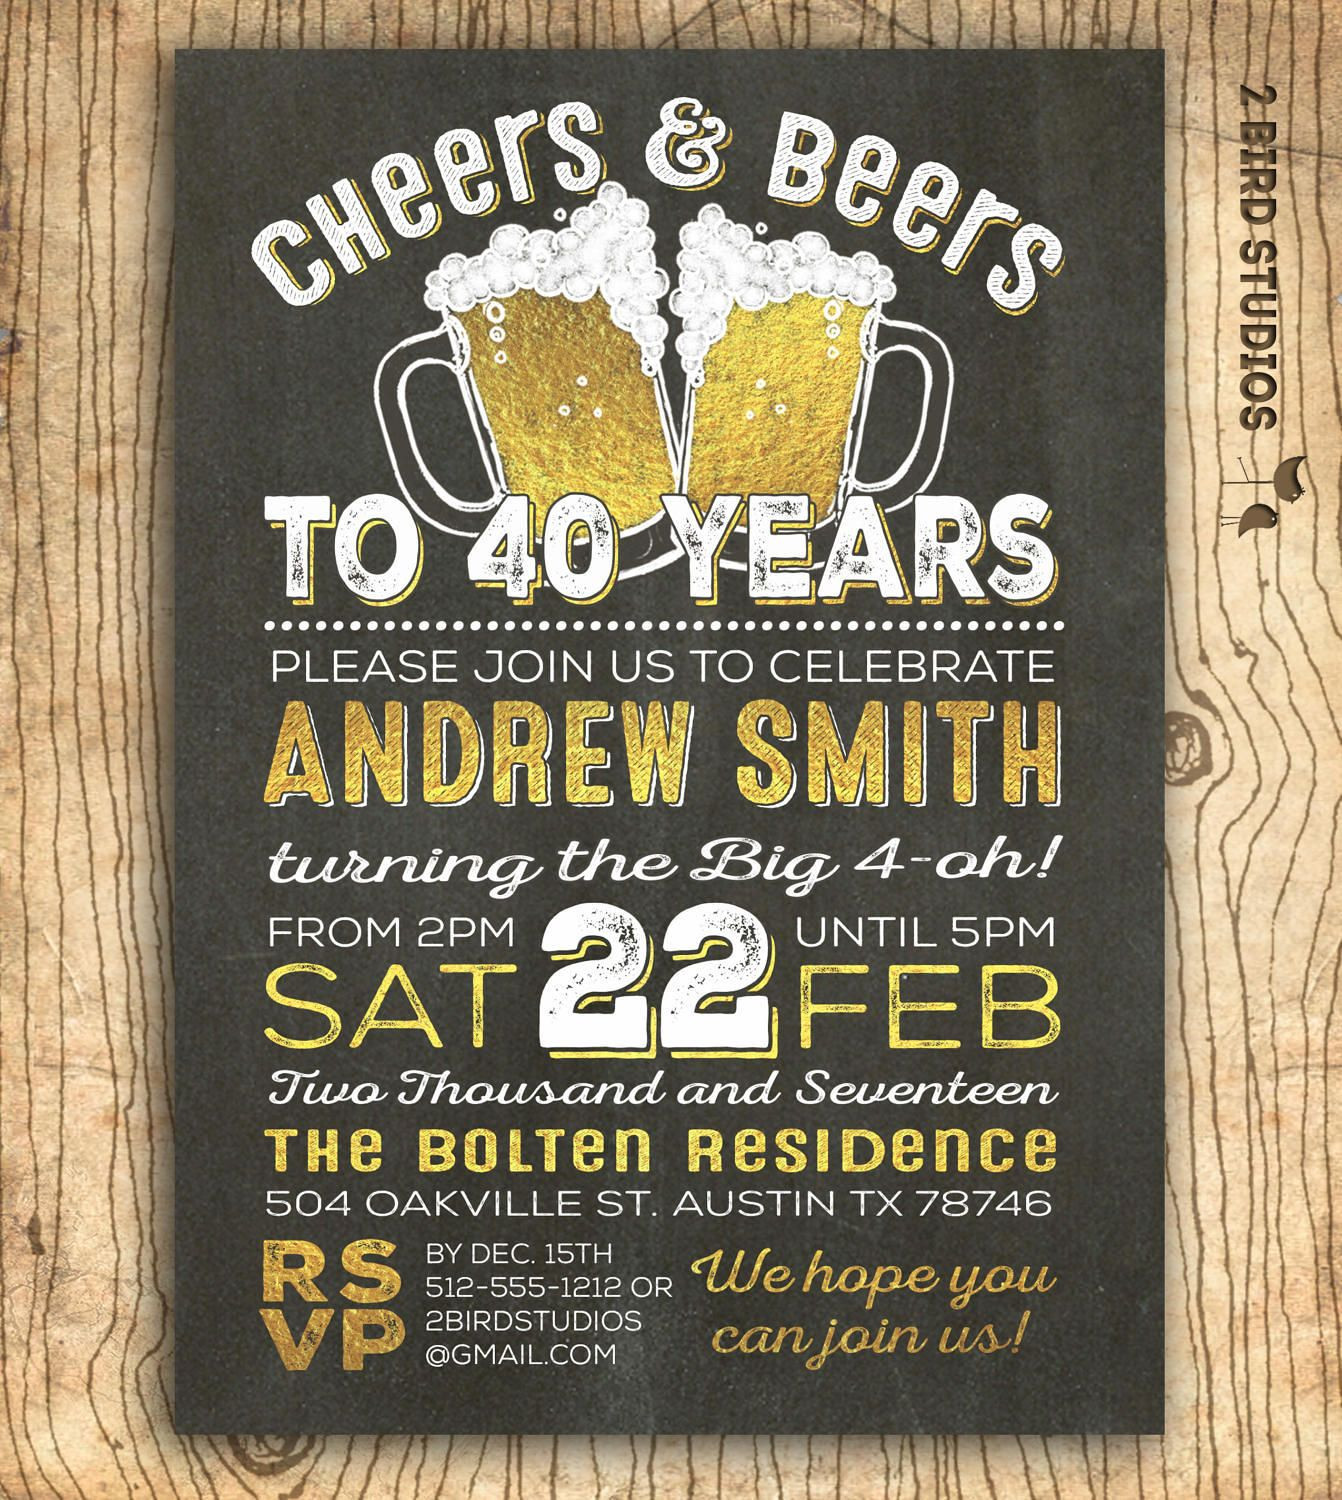 40th Birthday Party Invitations
 40th birthday invitation for men Cheers & beers to 40 years